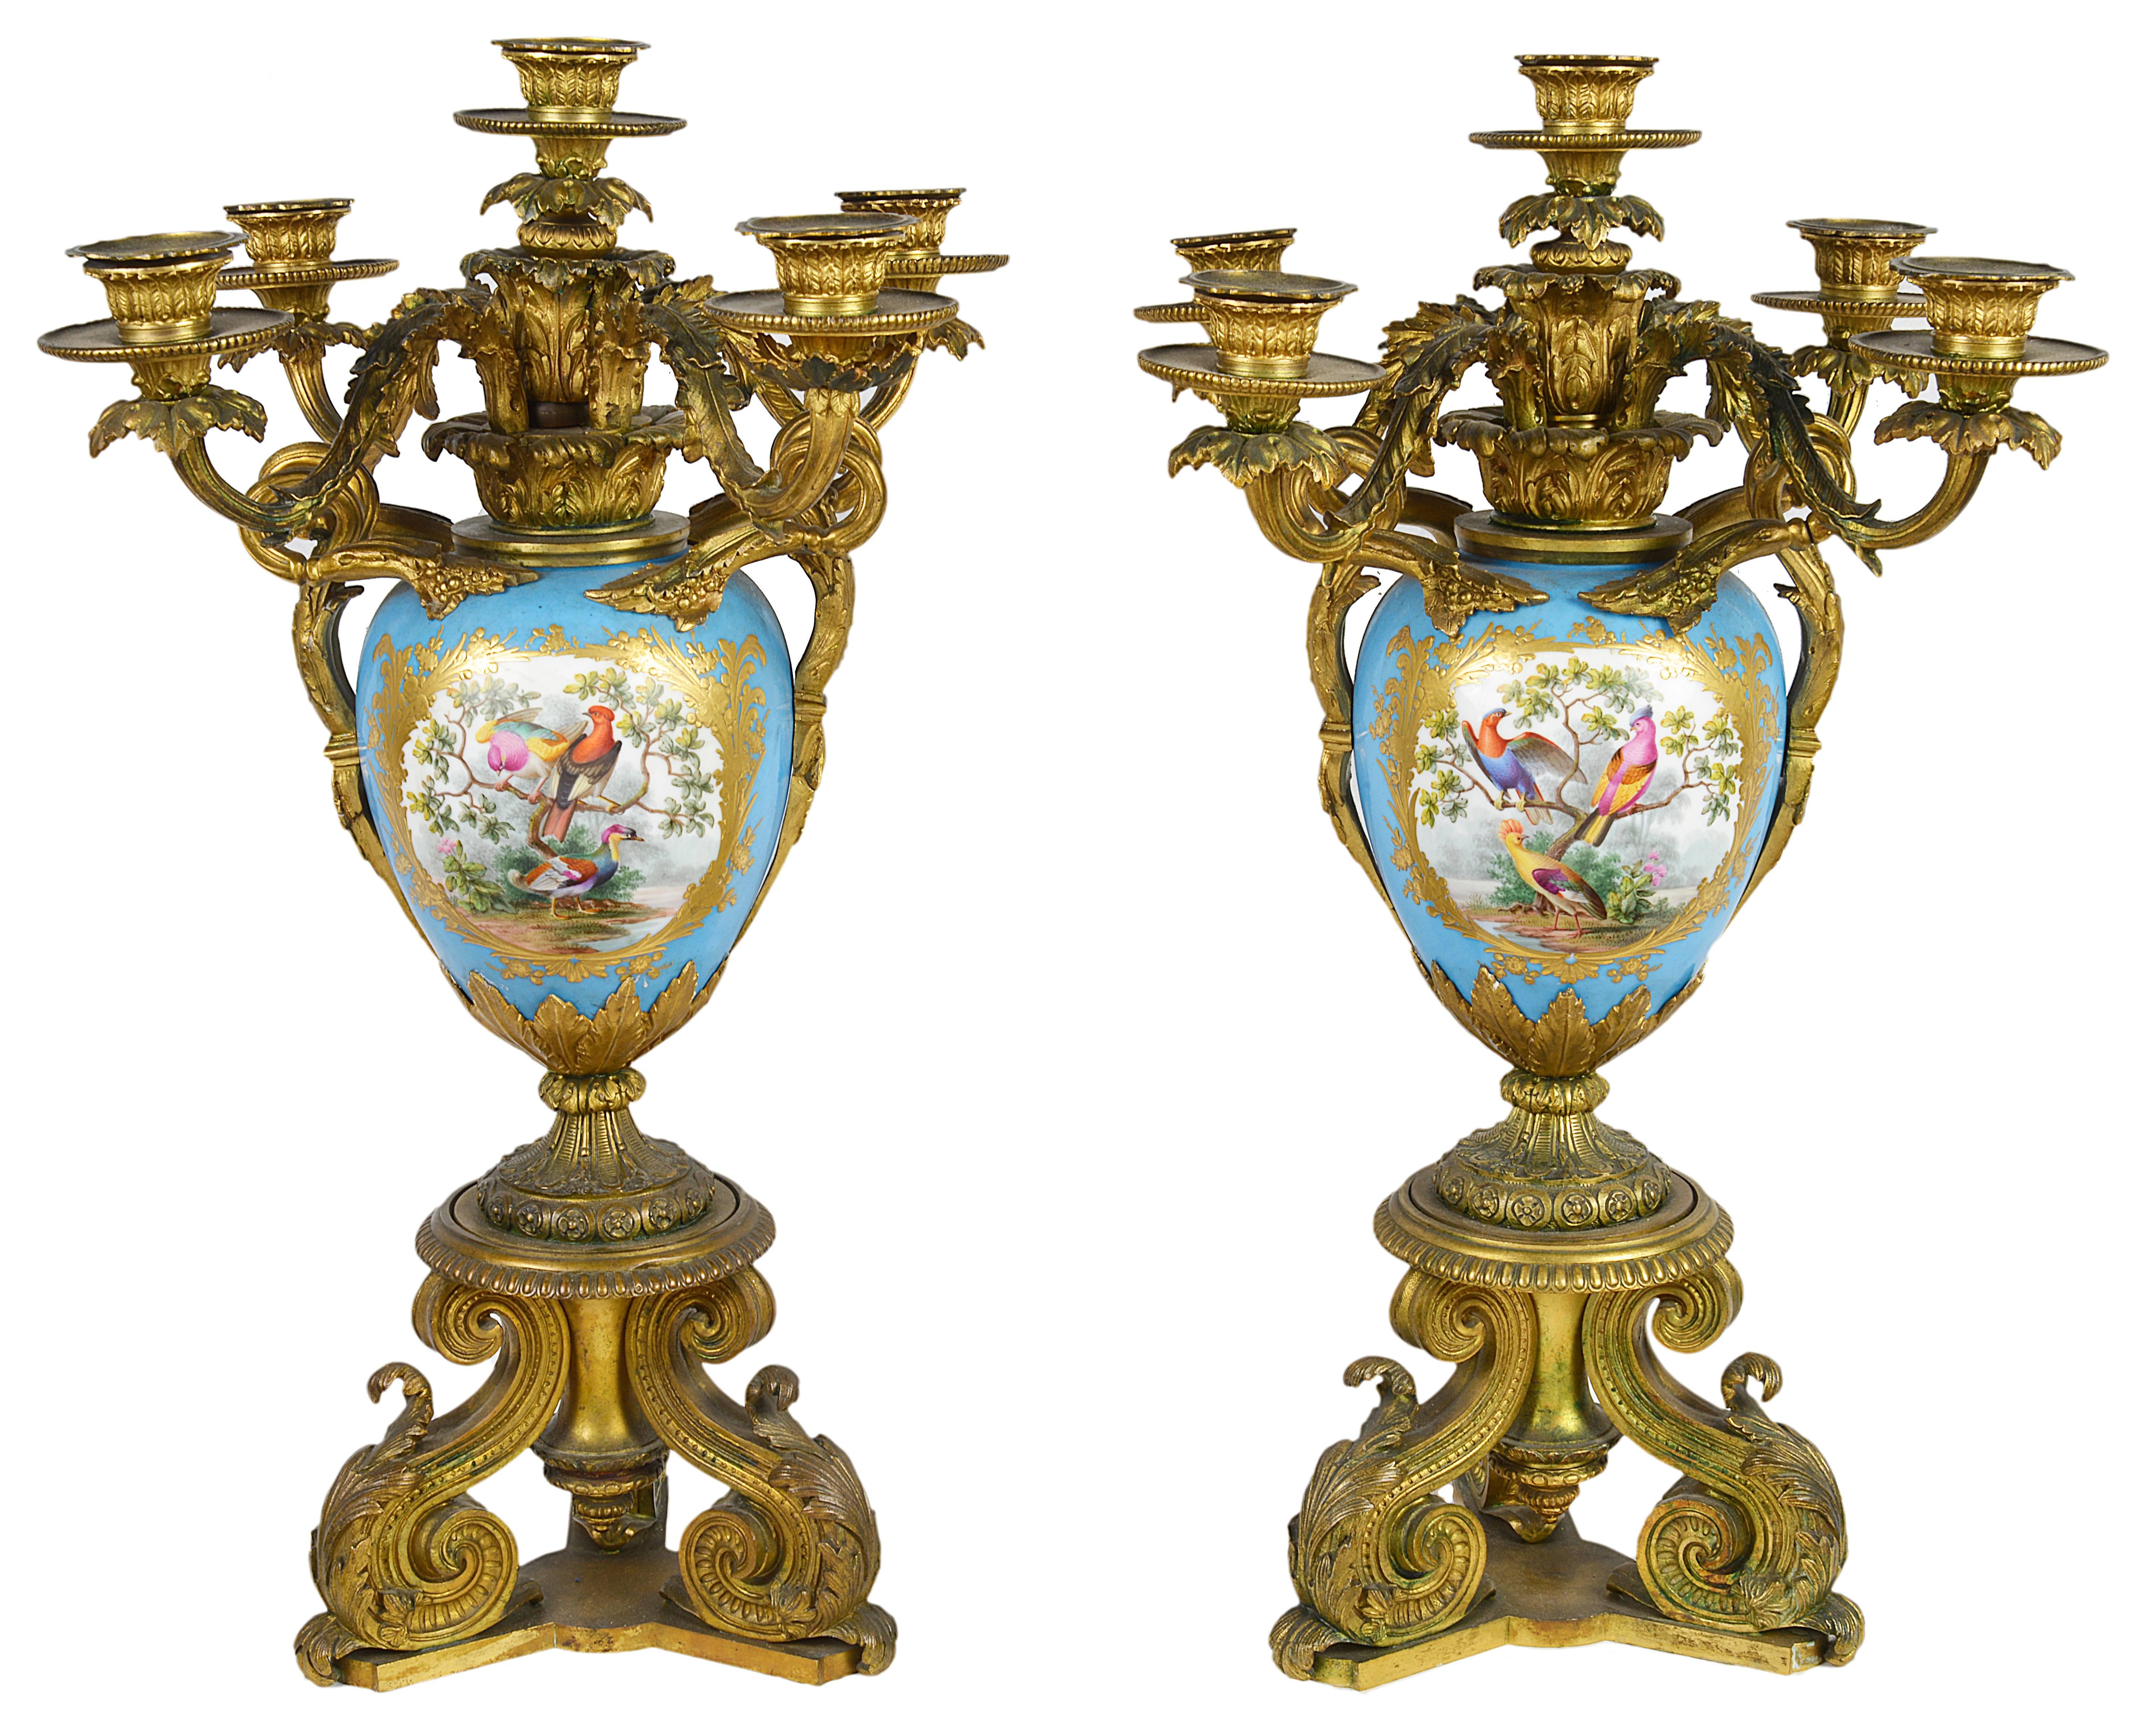 A very impressive pair of French 19th century sevres porcelain and gilded ormolu candelabra. Each candelabra having five branches with scrolling leaf decoration. The turquoise porcelain vases having hand-painted panels of exotic birds with gilded